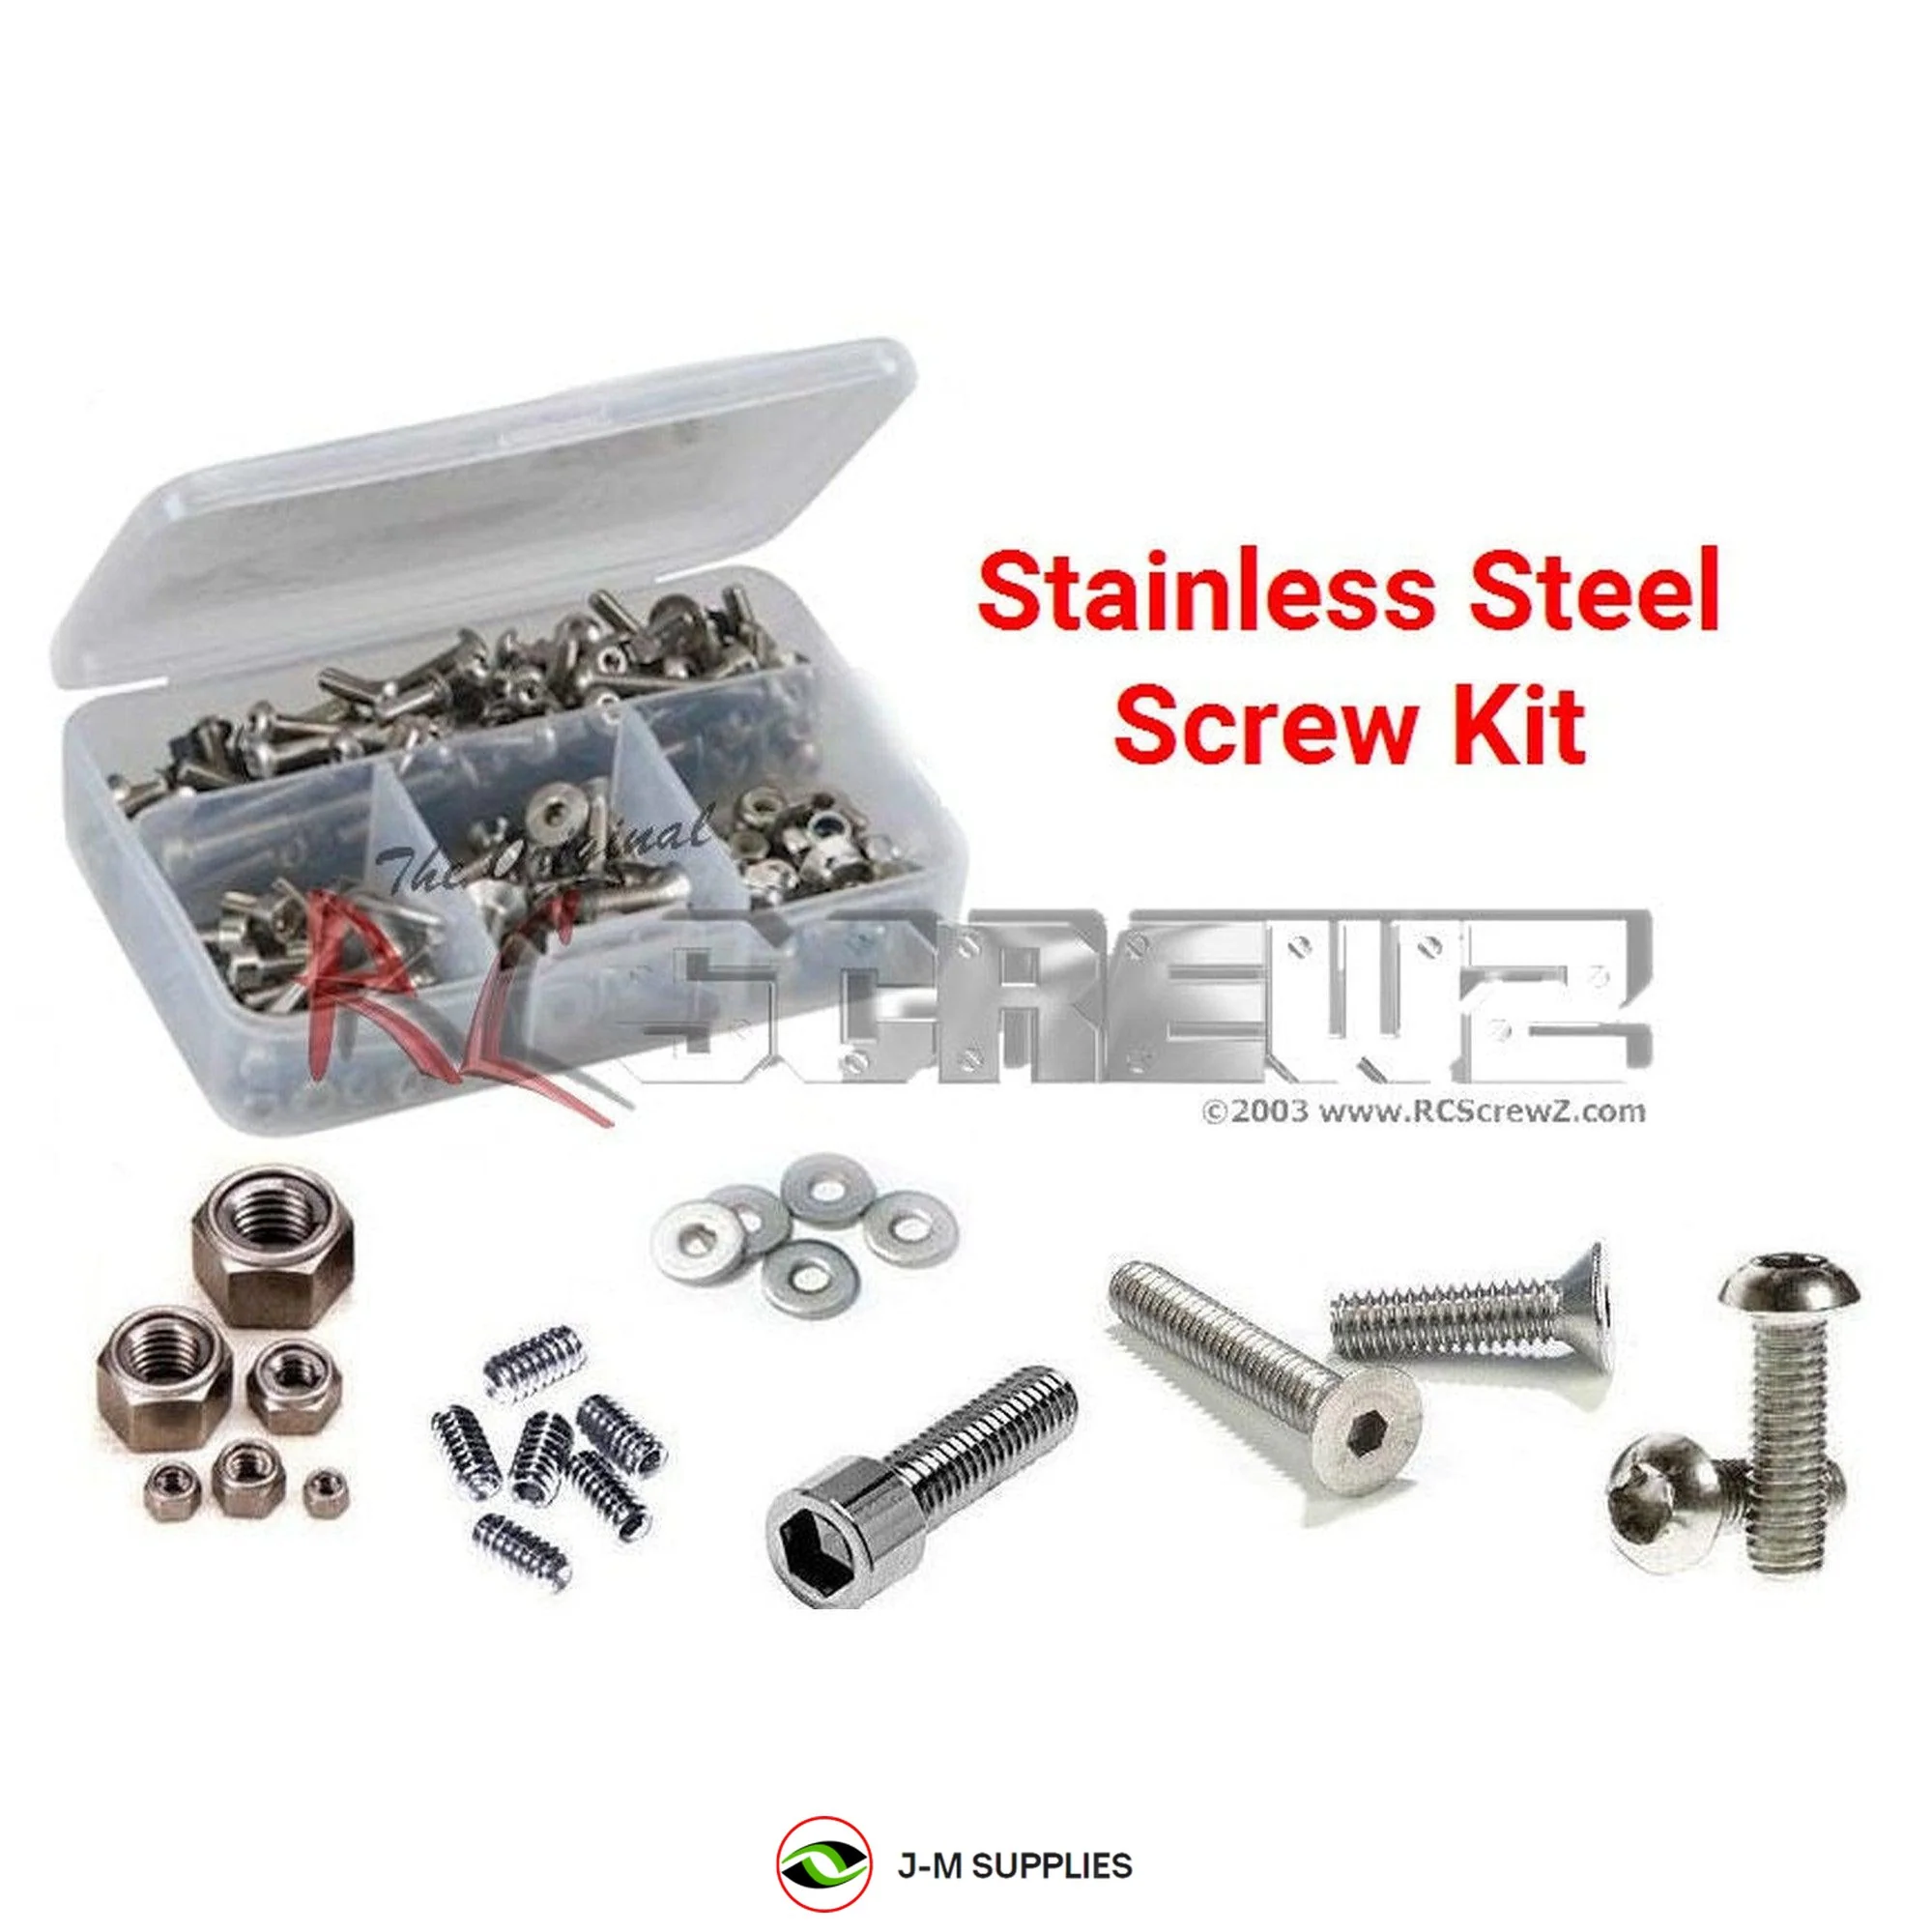 RCScrewZ Stainless Steel Screw Kit kyo108 for Kyosho Pure Ten GP FW-06 #31374 - Picture 1 of 12